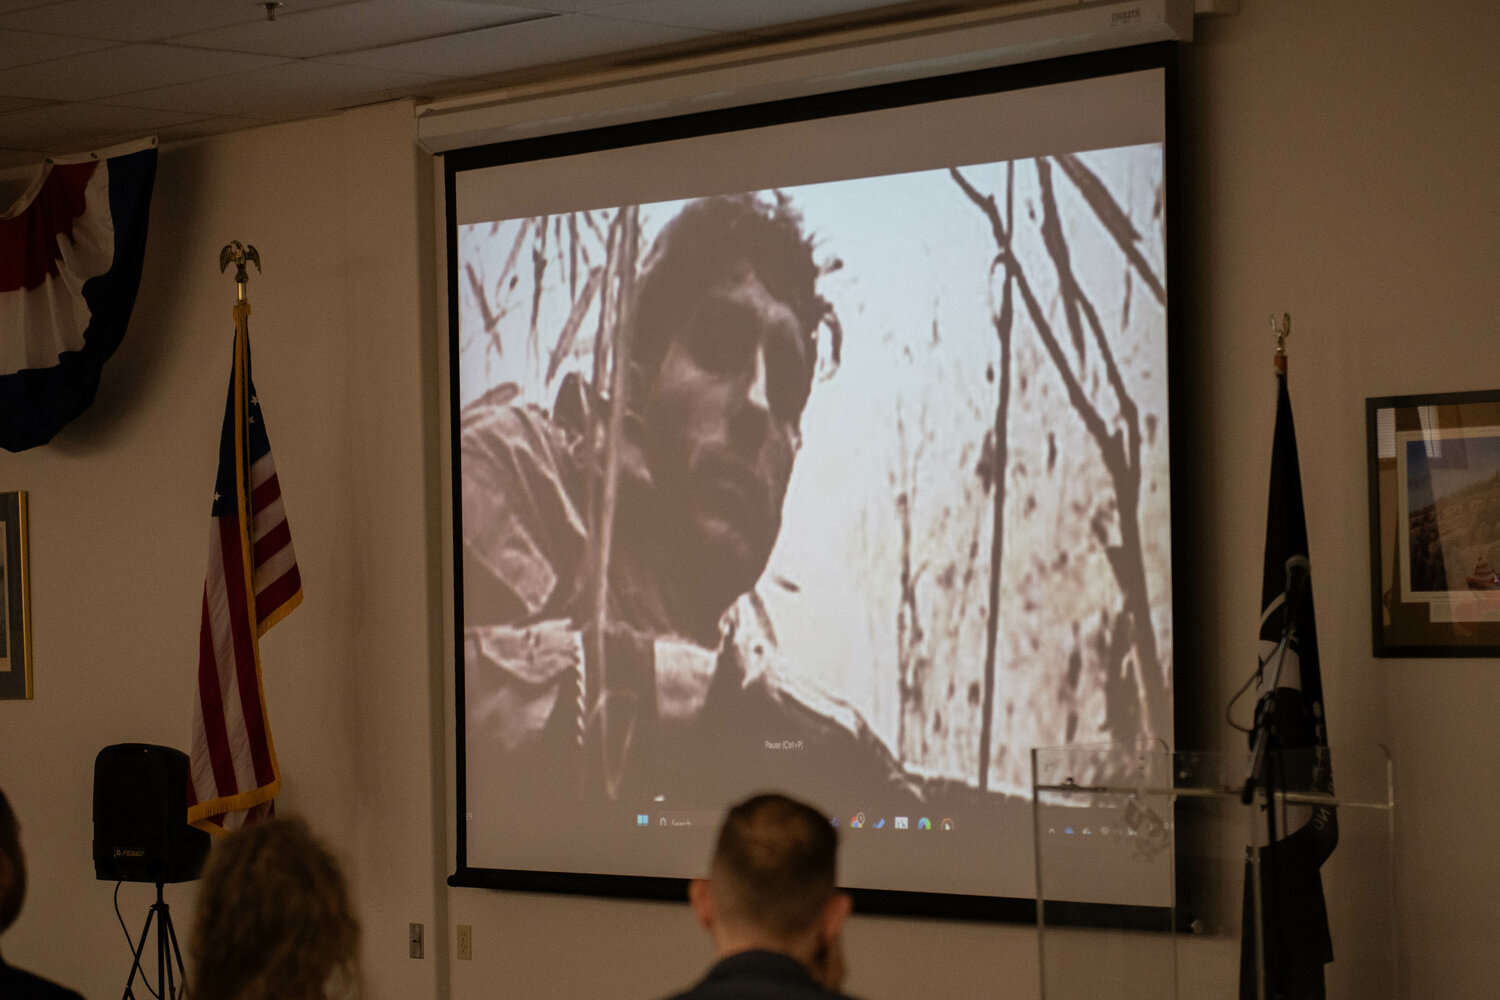 Franklin Miller is pictured while a video is played capturing moments of his heroism in Vietnam during a ceremony at the Veterans Memorial Museum in Chehalis on Jan. 5